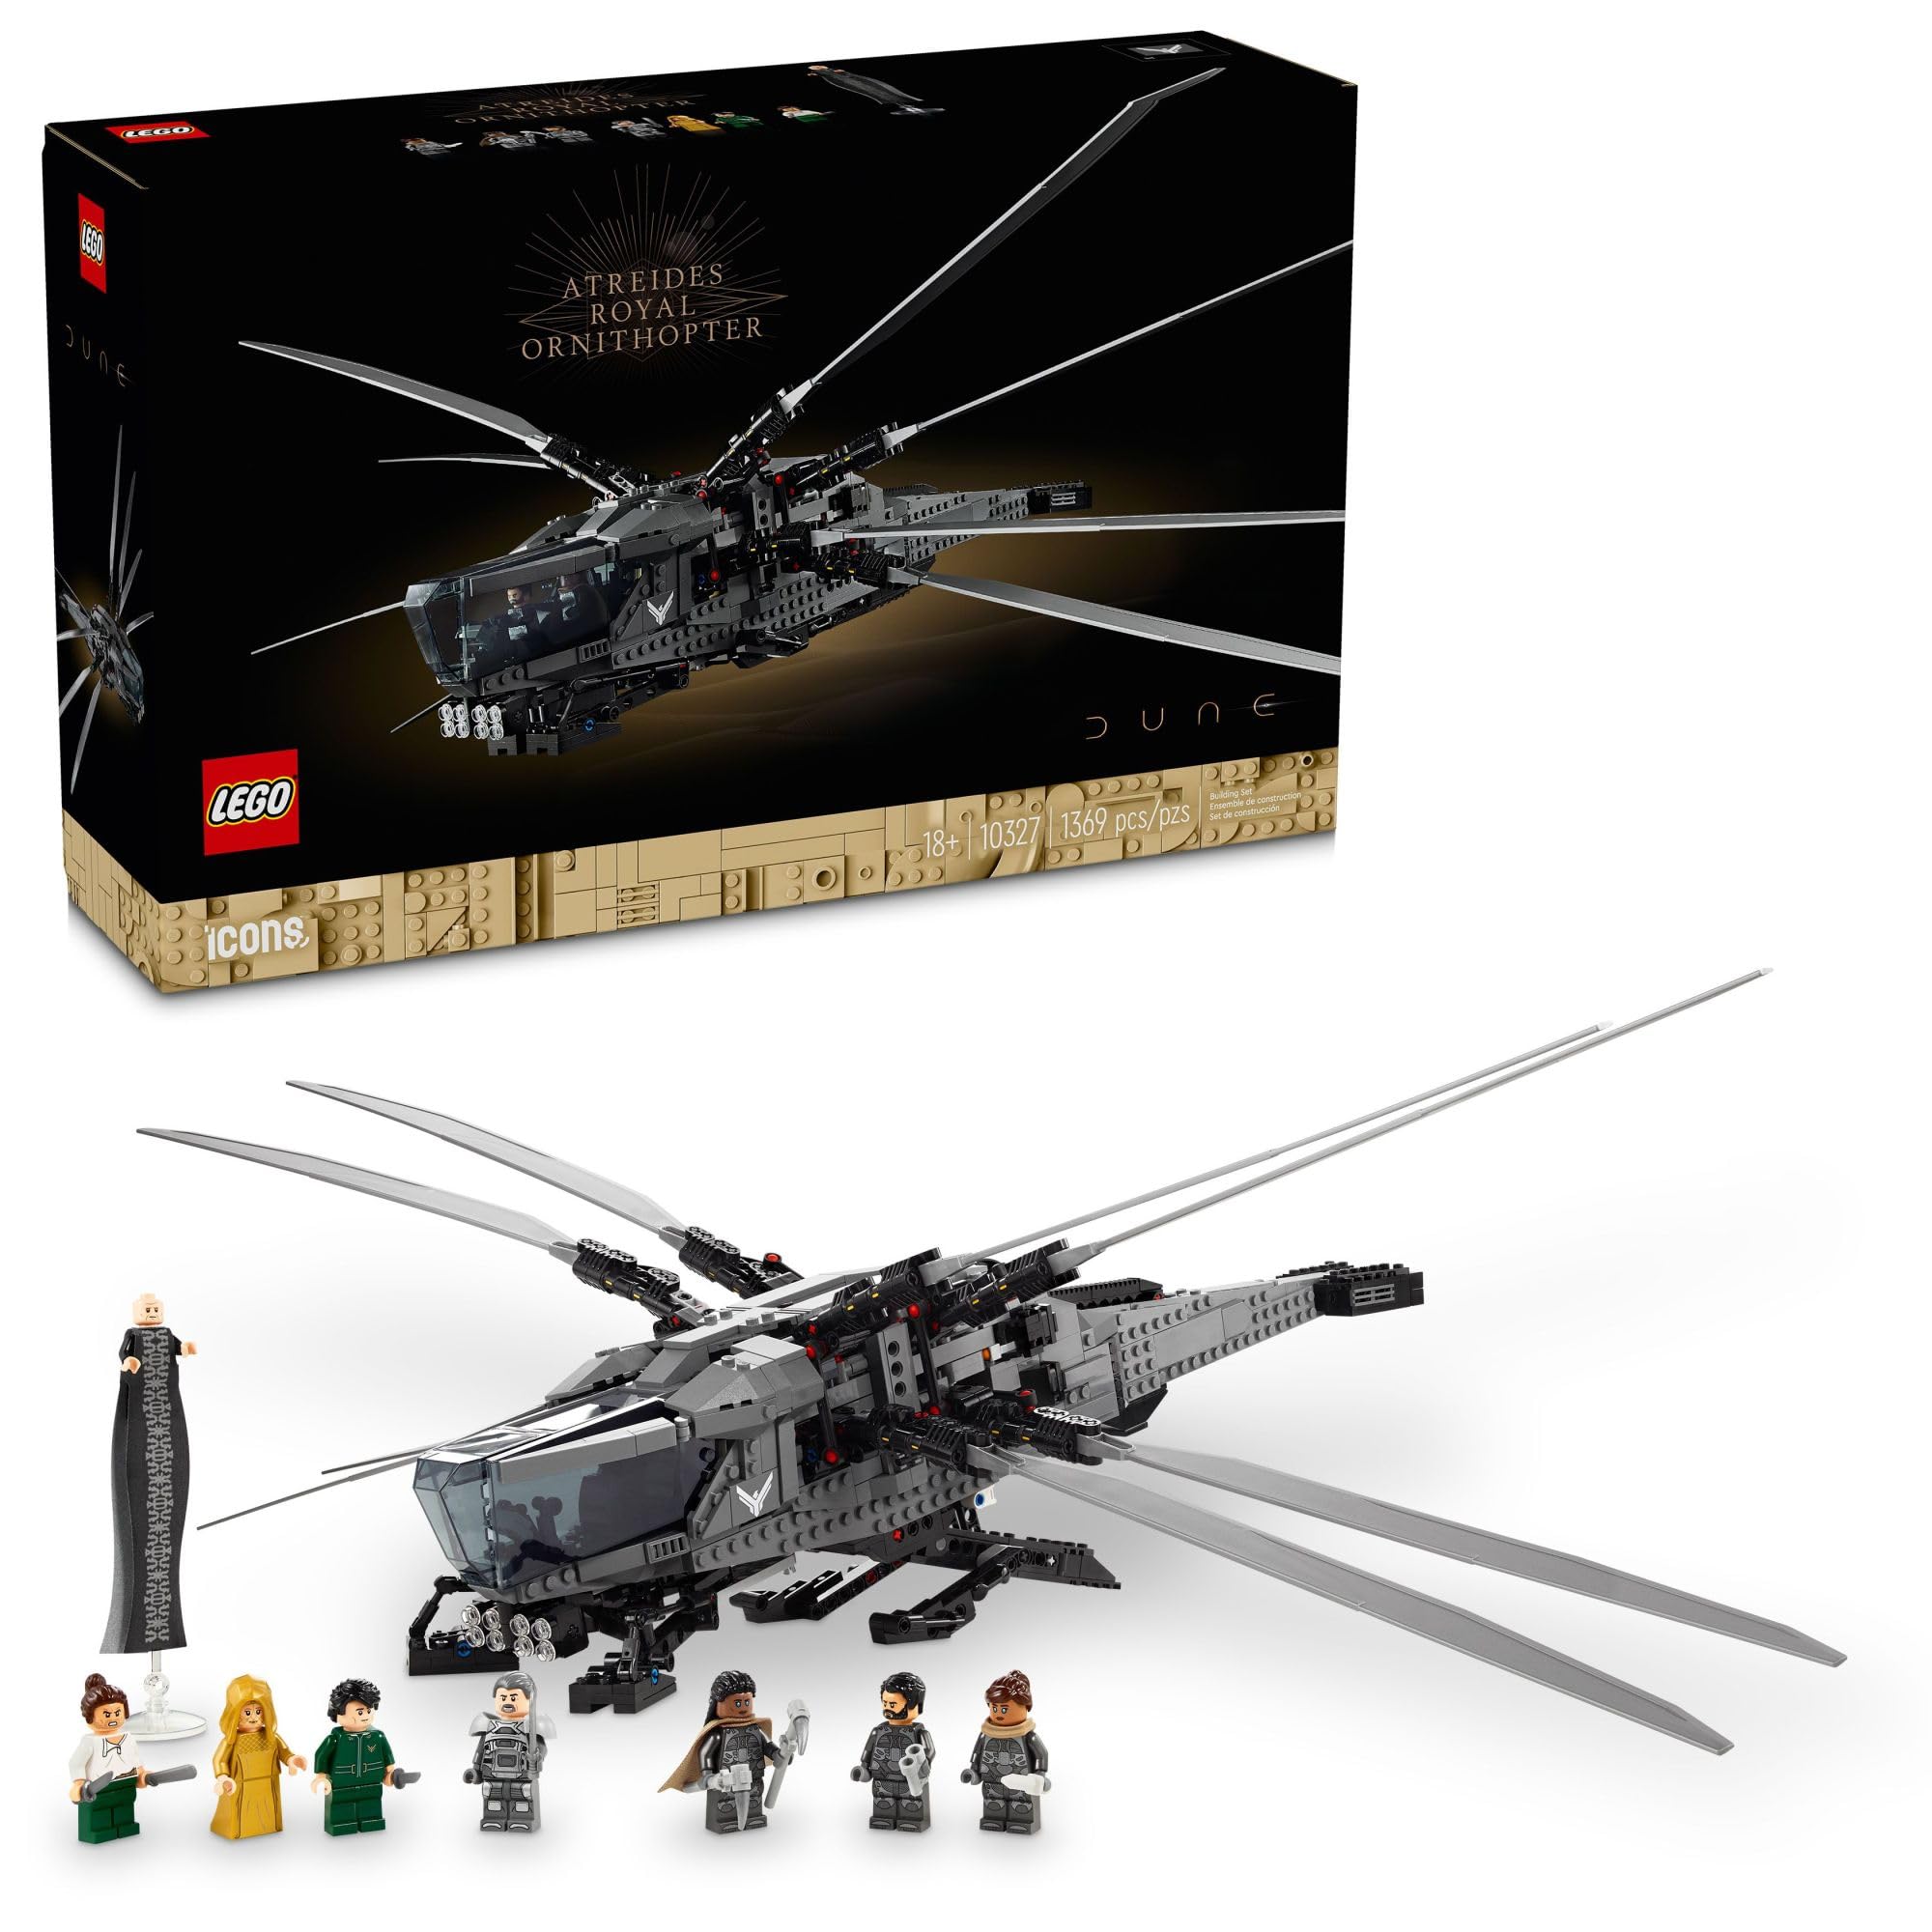 Lego Dune Ornithopter at Costco B&M $139.99